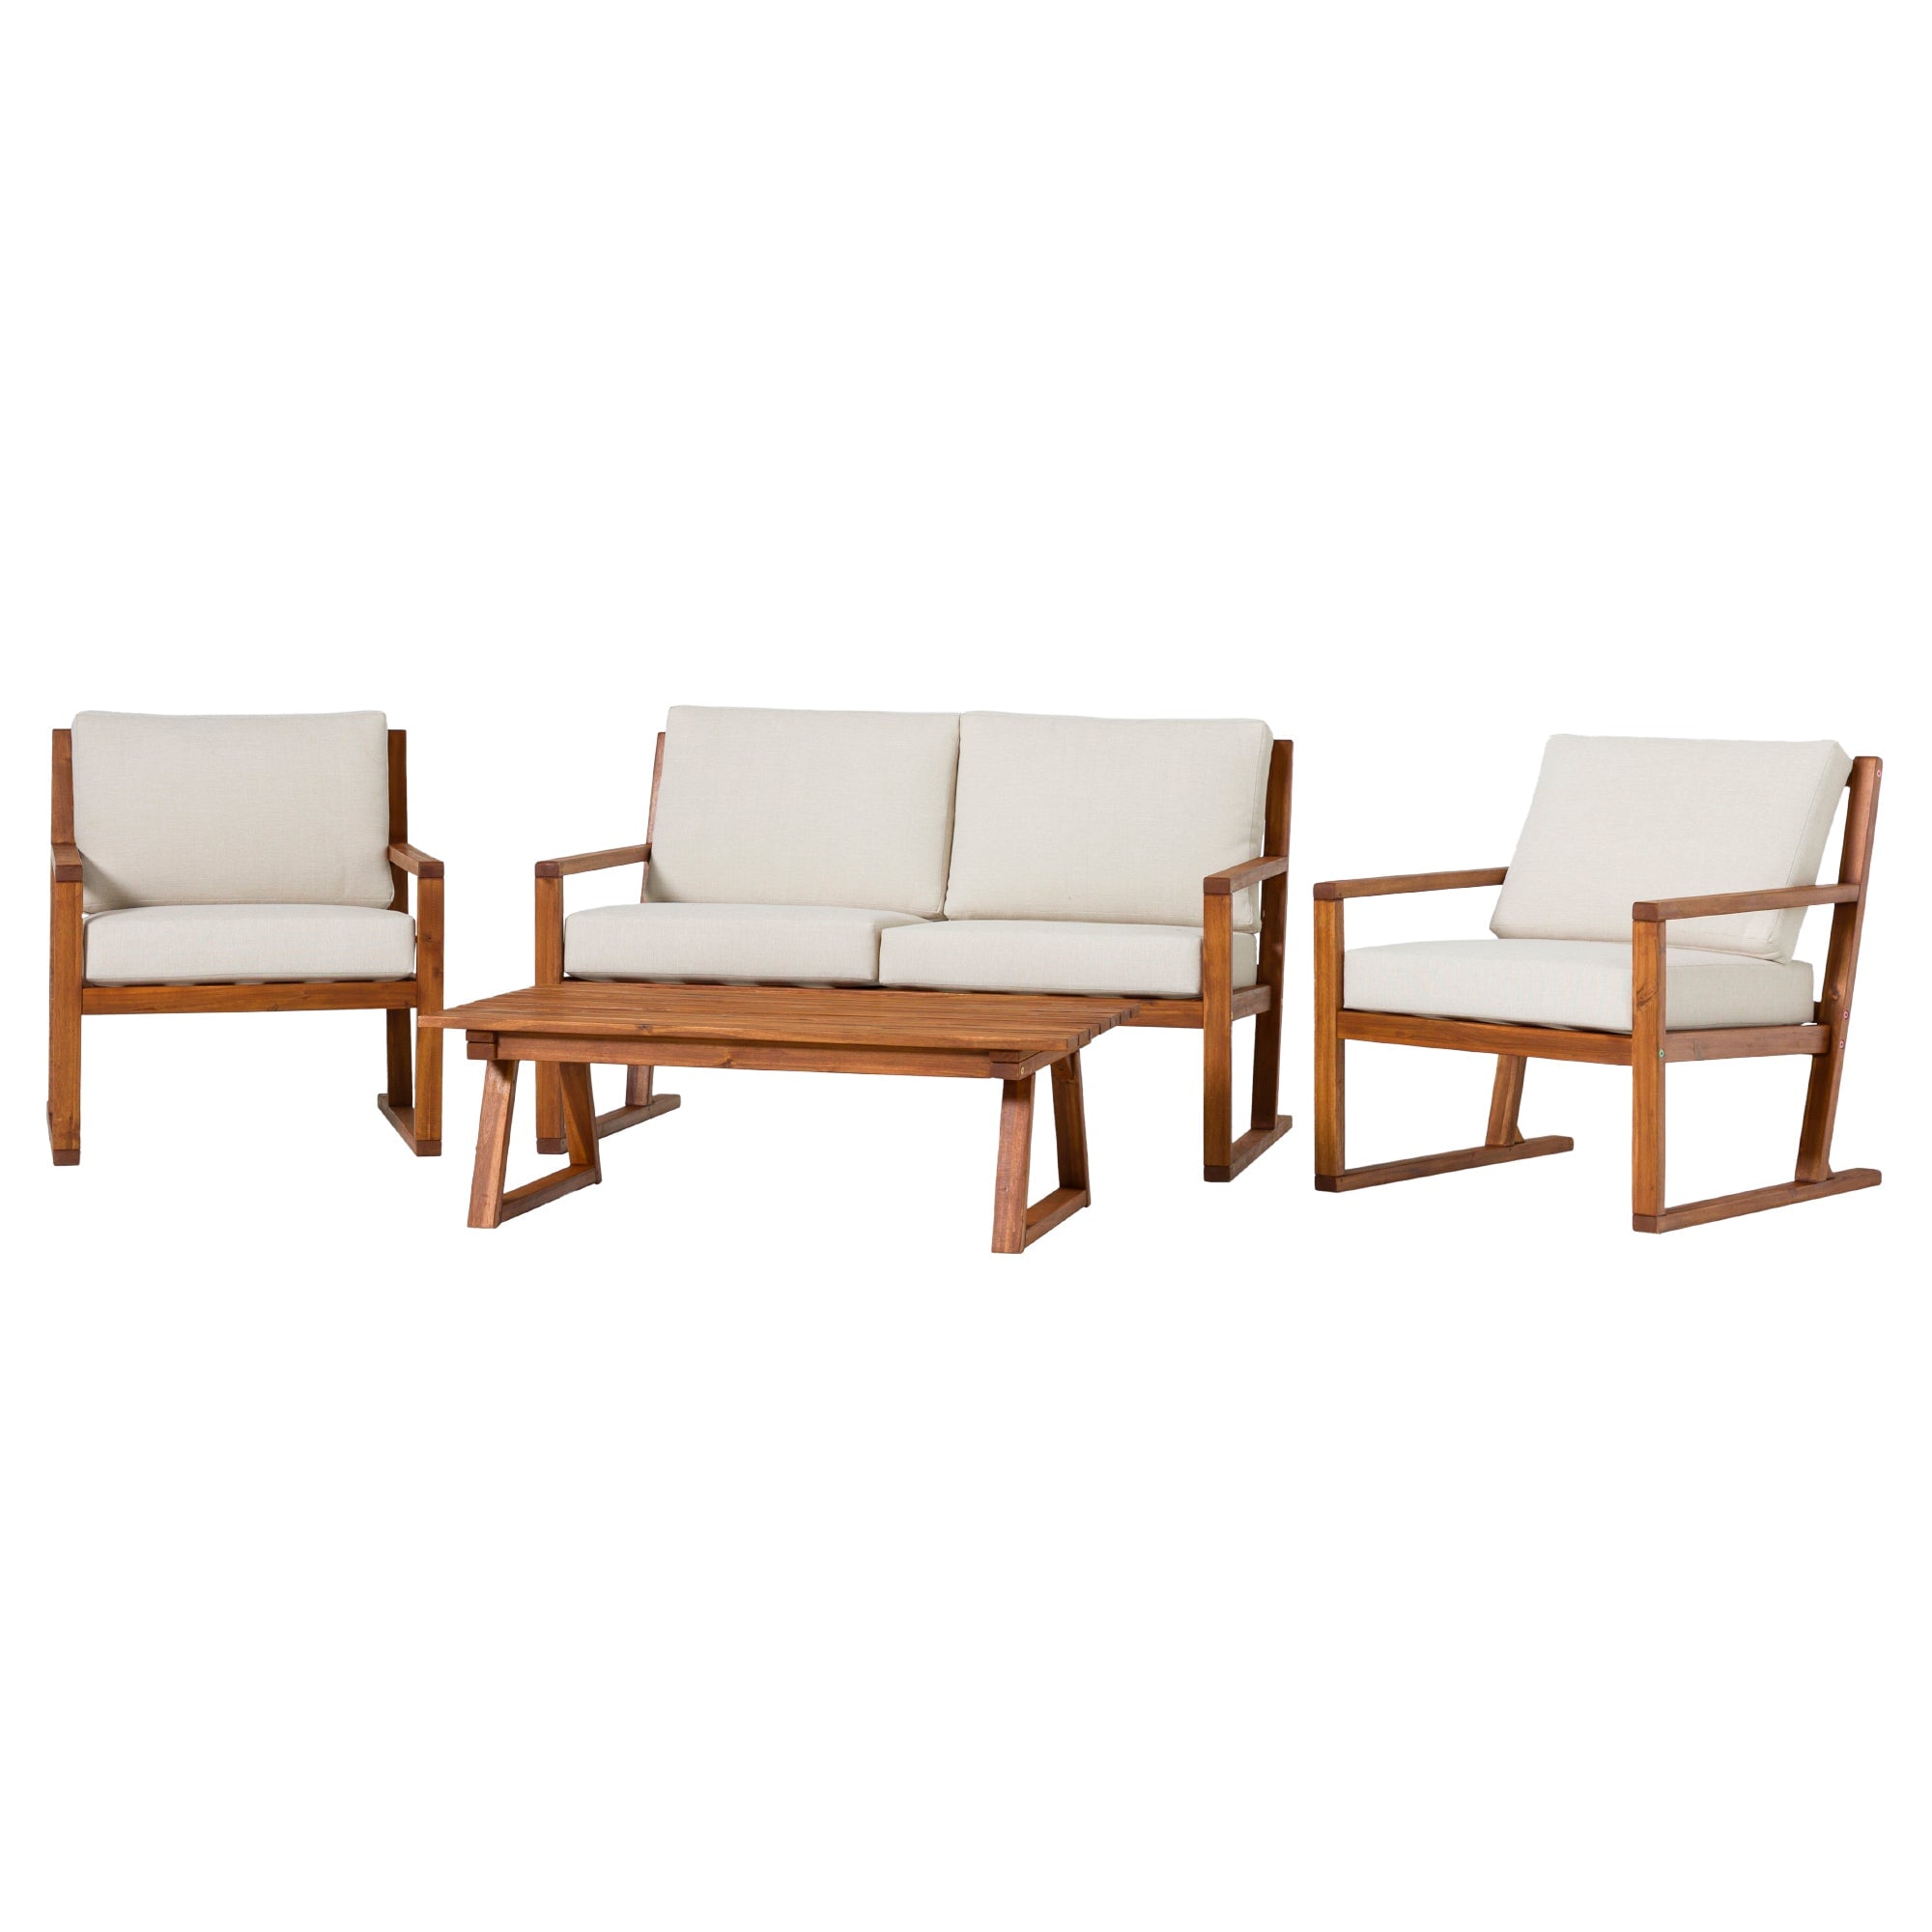 Walker Edison Prenton 4-Piece Modern Acacia Outdoor Slatted Chat Set with Coffee Table